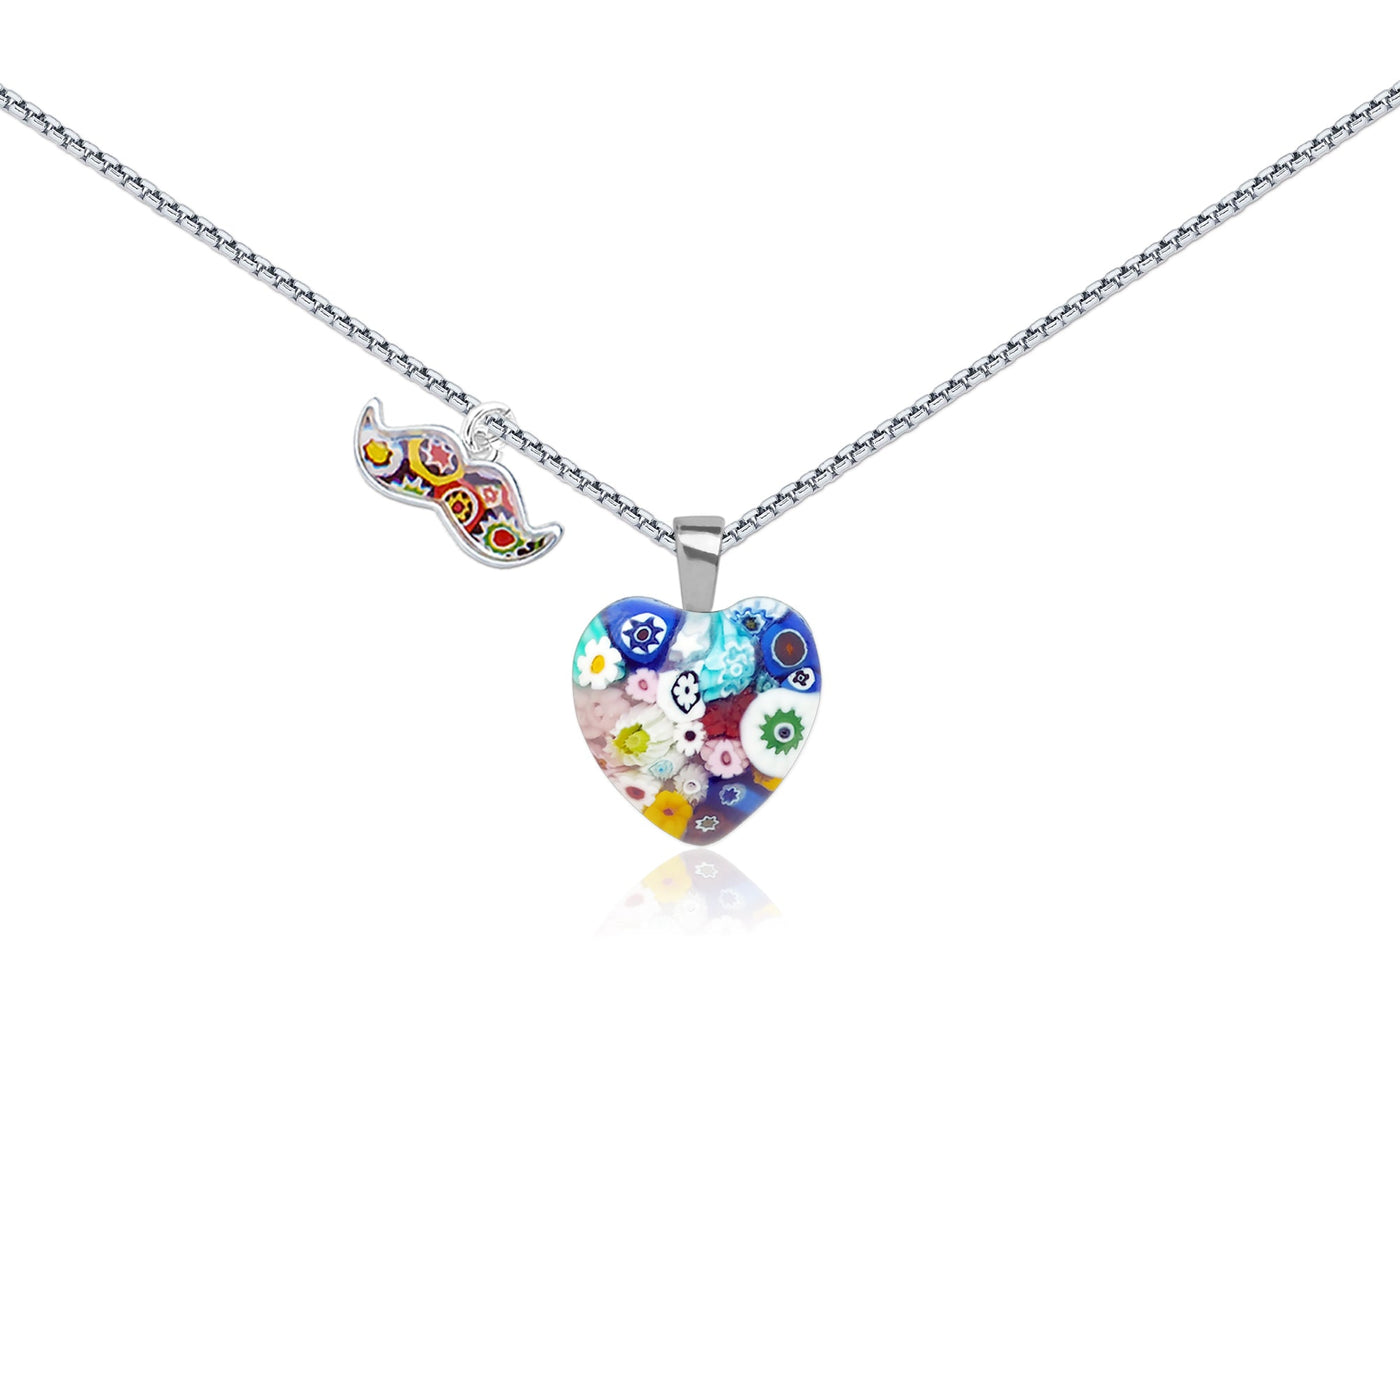 Mini Heart in Bloom Necklace - 16mm - Pendant Necklace